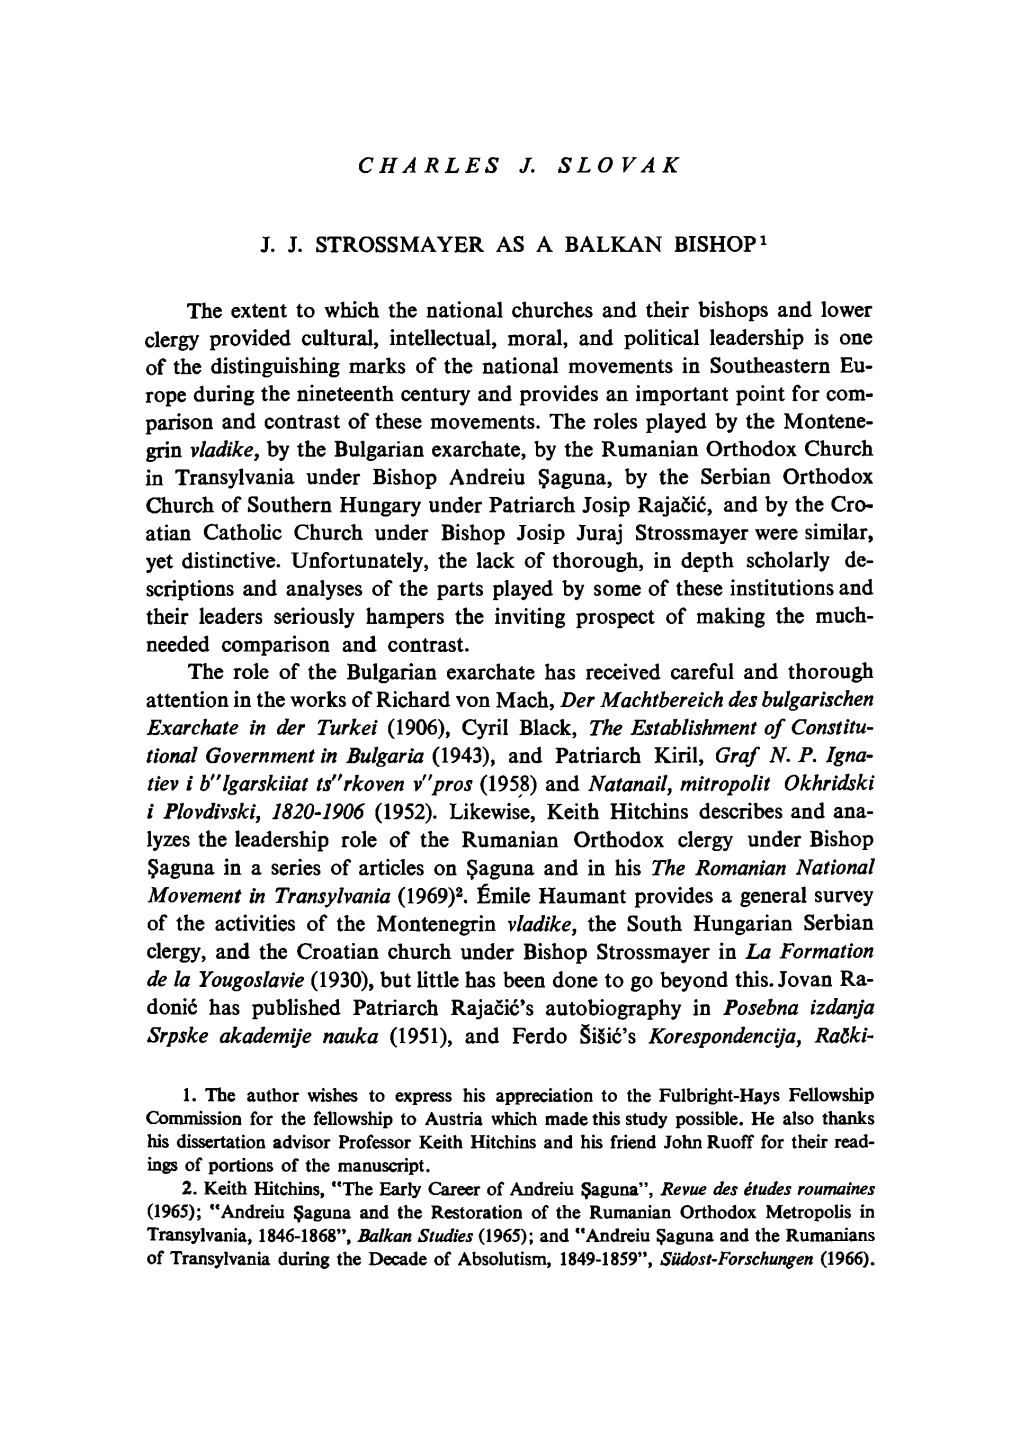 J. J. STROSSMAYER AS a BALKAN BISHOP1 the Extent to Which